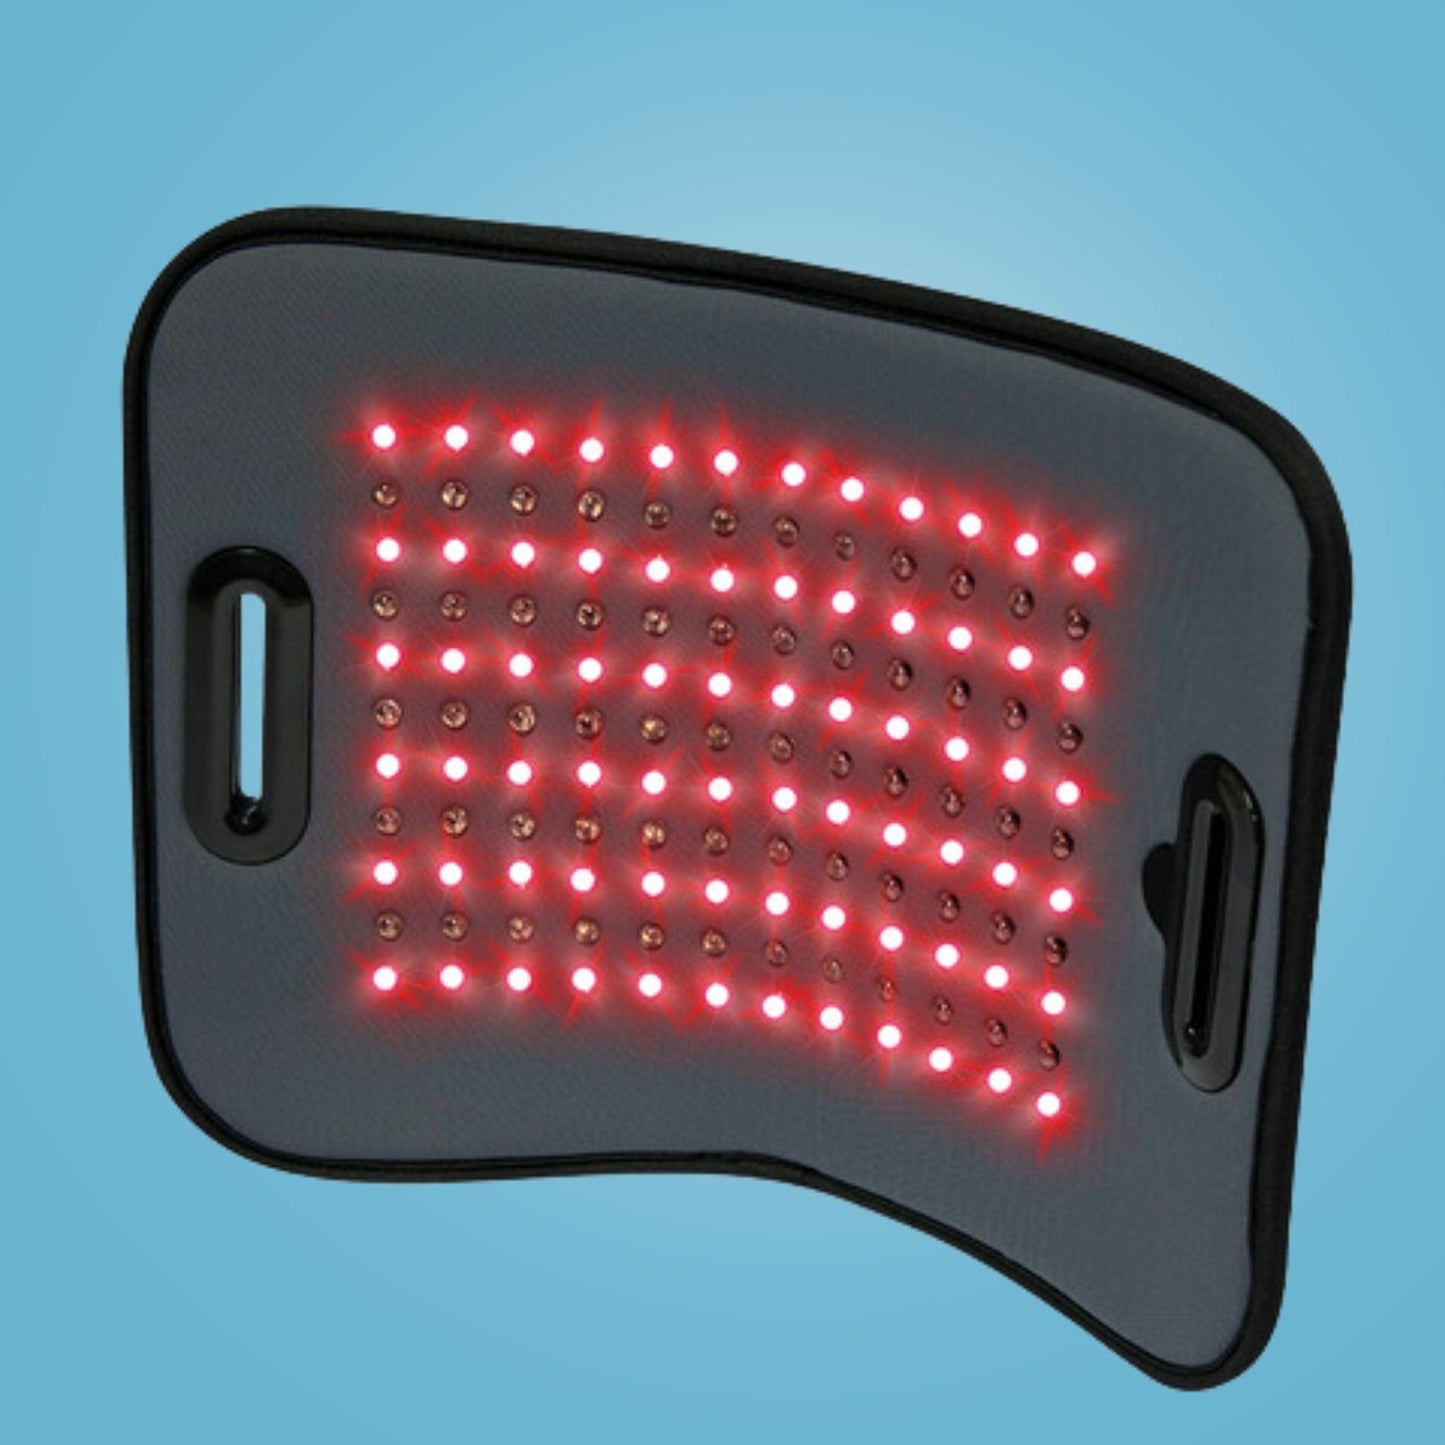 Near-infrared light therapy